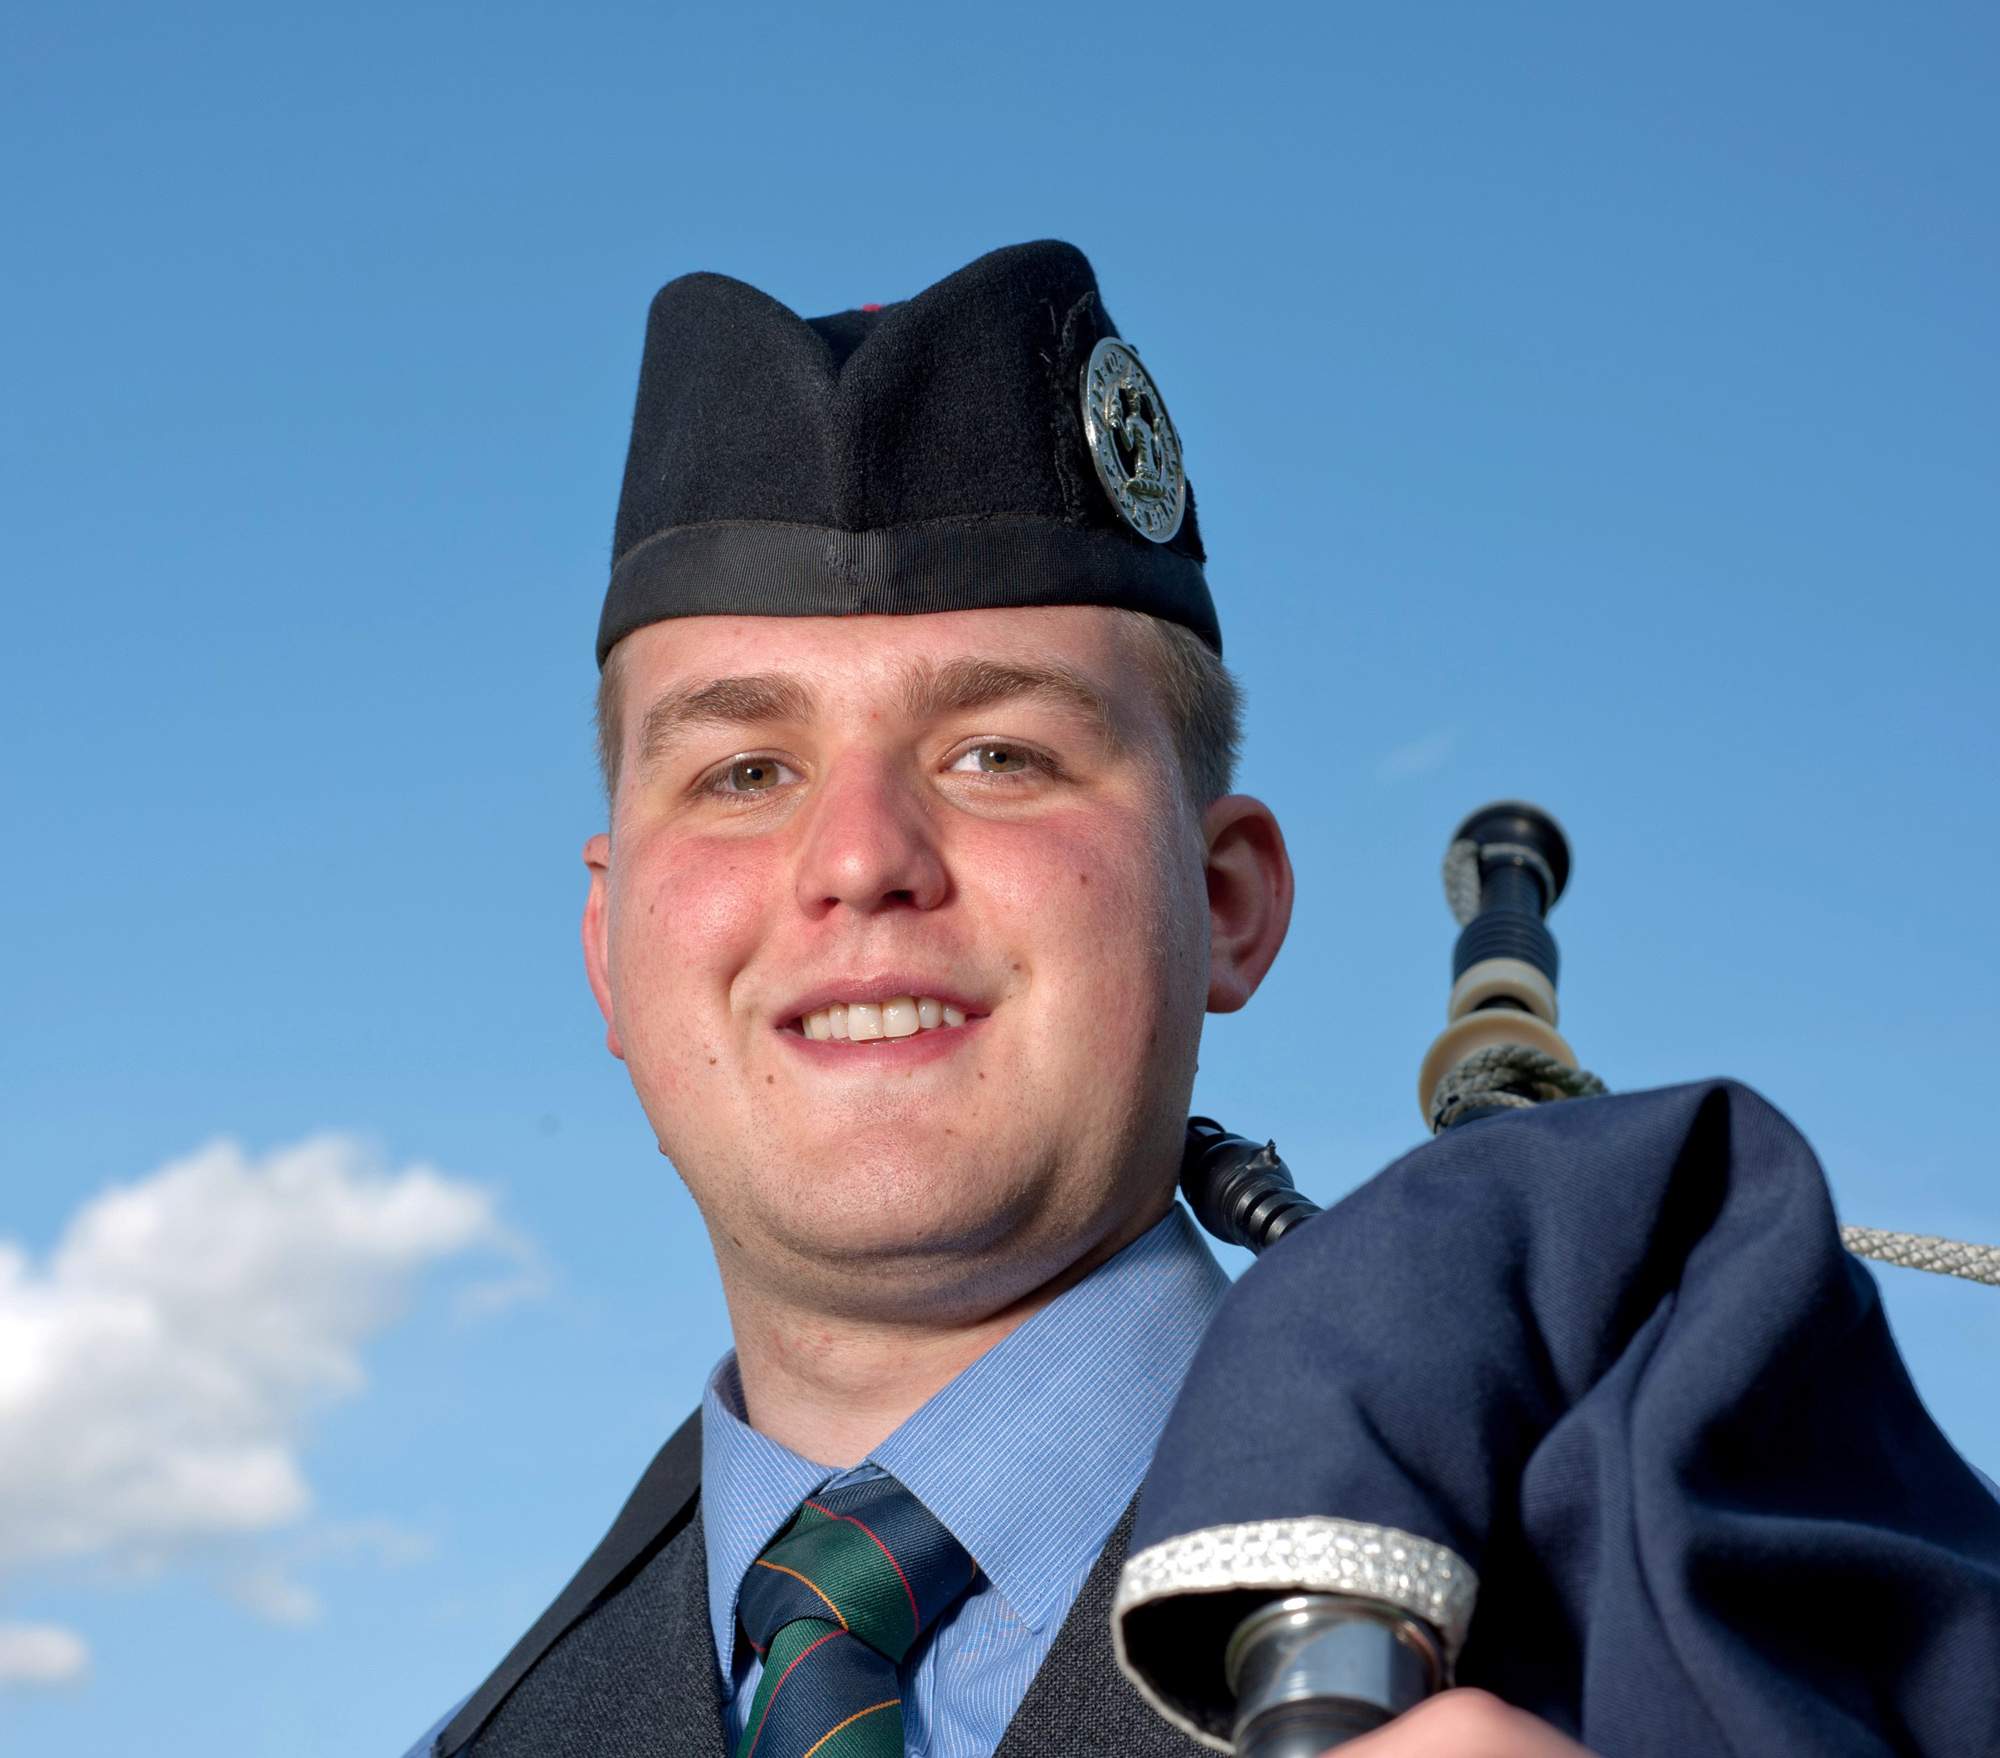 Sutherland lands overall at Blair pipesdrums